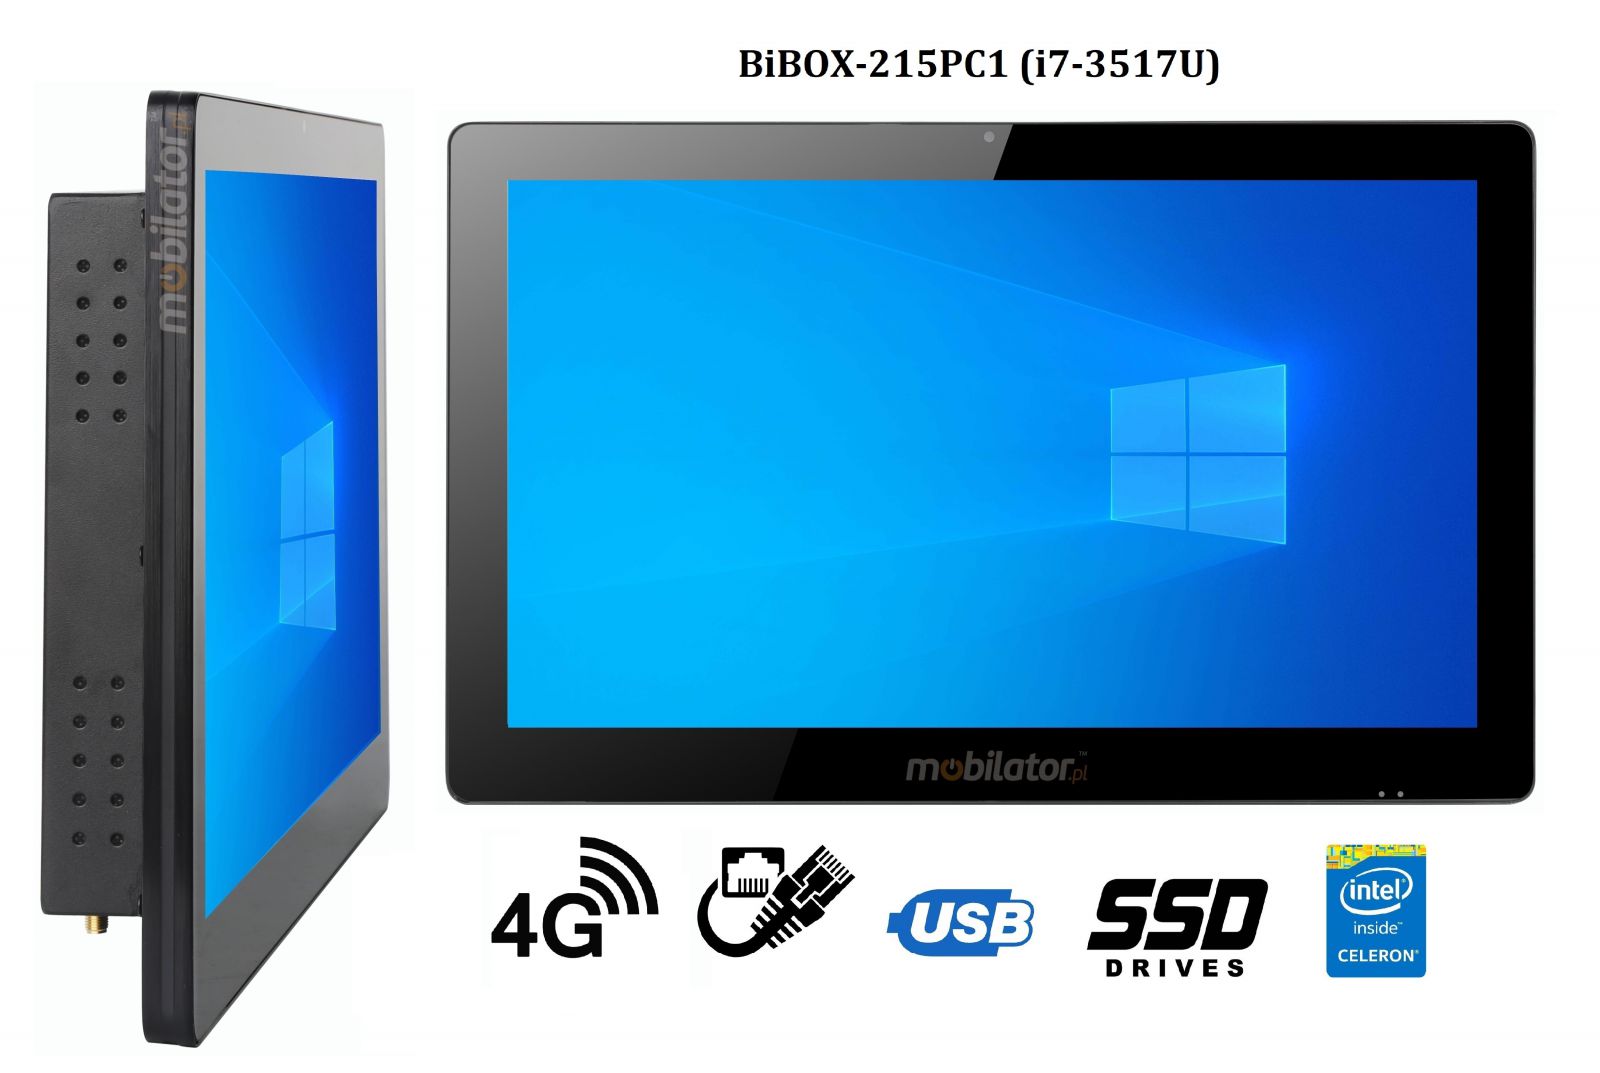 BiBOX-215PC1 (i7-3517U) v.5 - Rugged computer panel with IP65 (water and dust resistance) with 256 GB SSD disk, 4G technology and WiFi